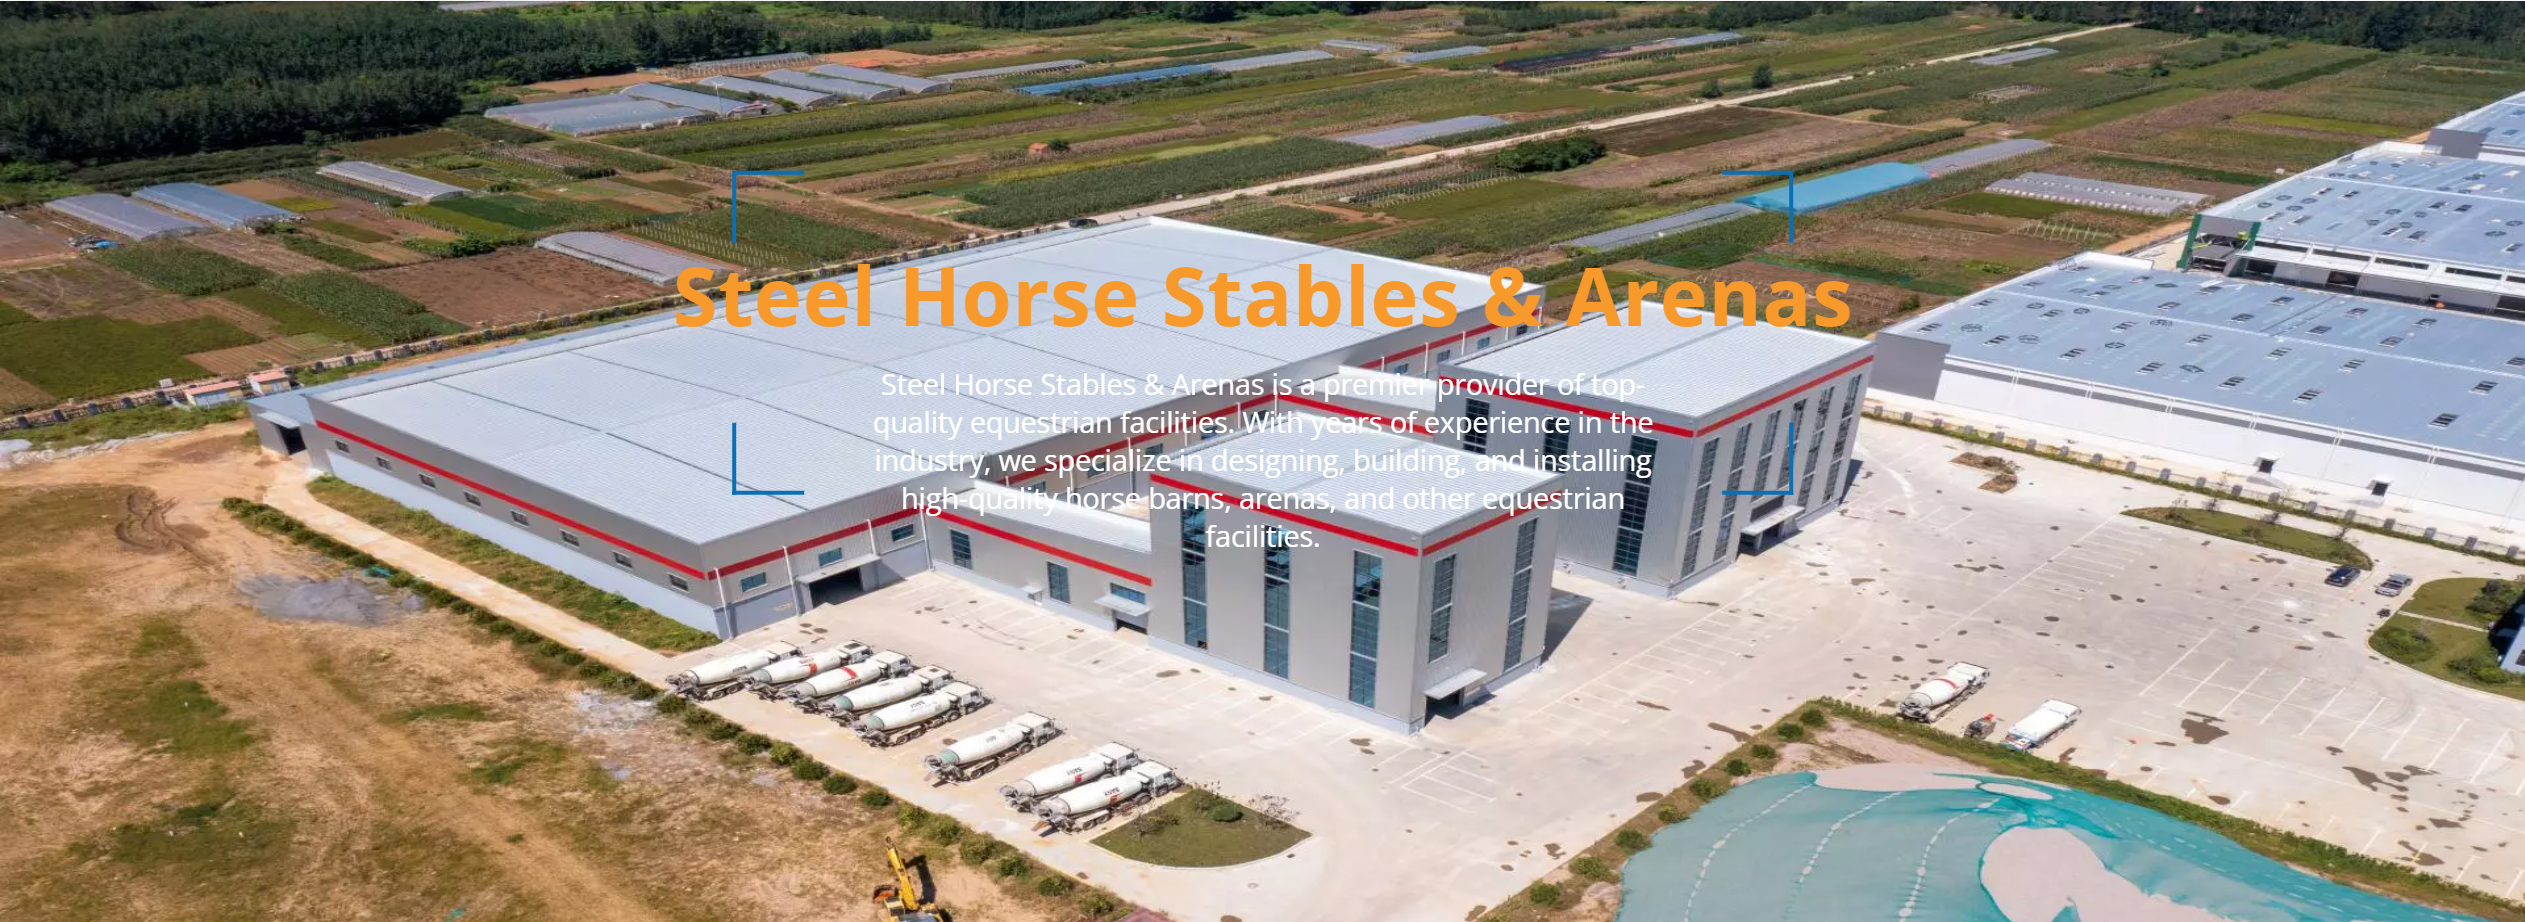 Steel Horse Stables & Arenas